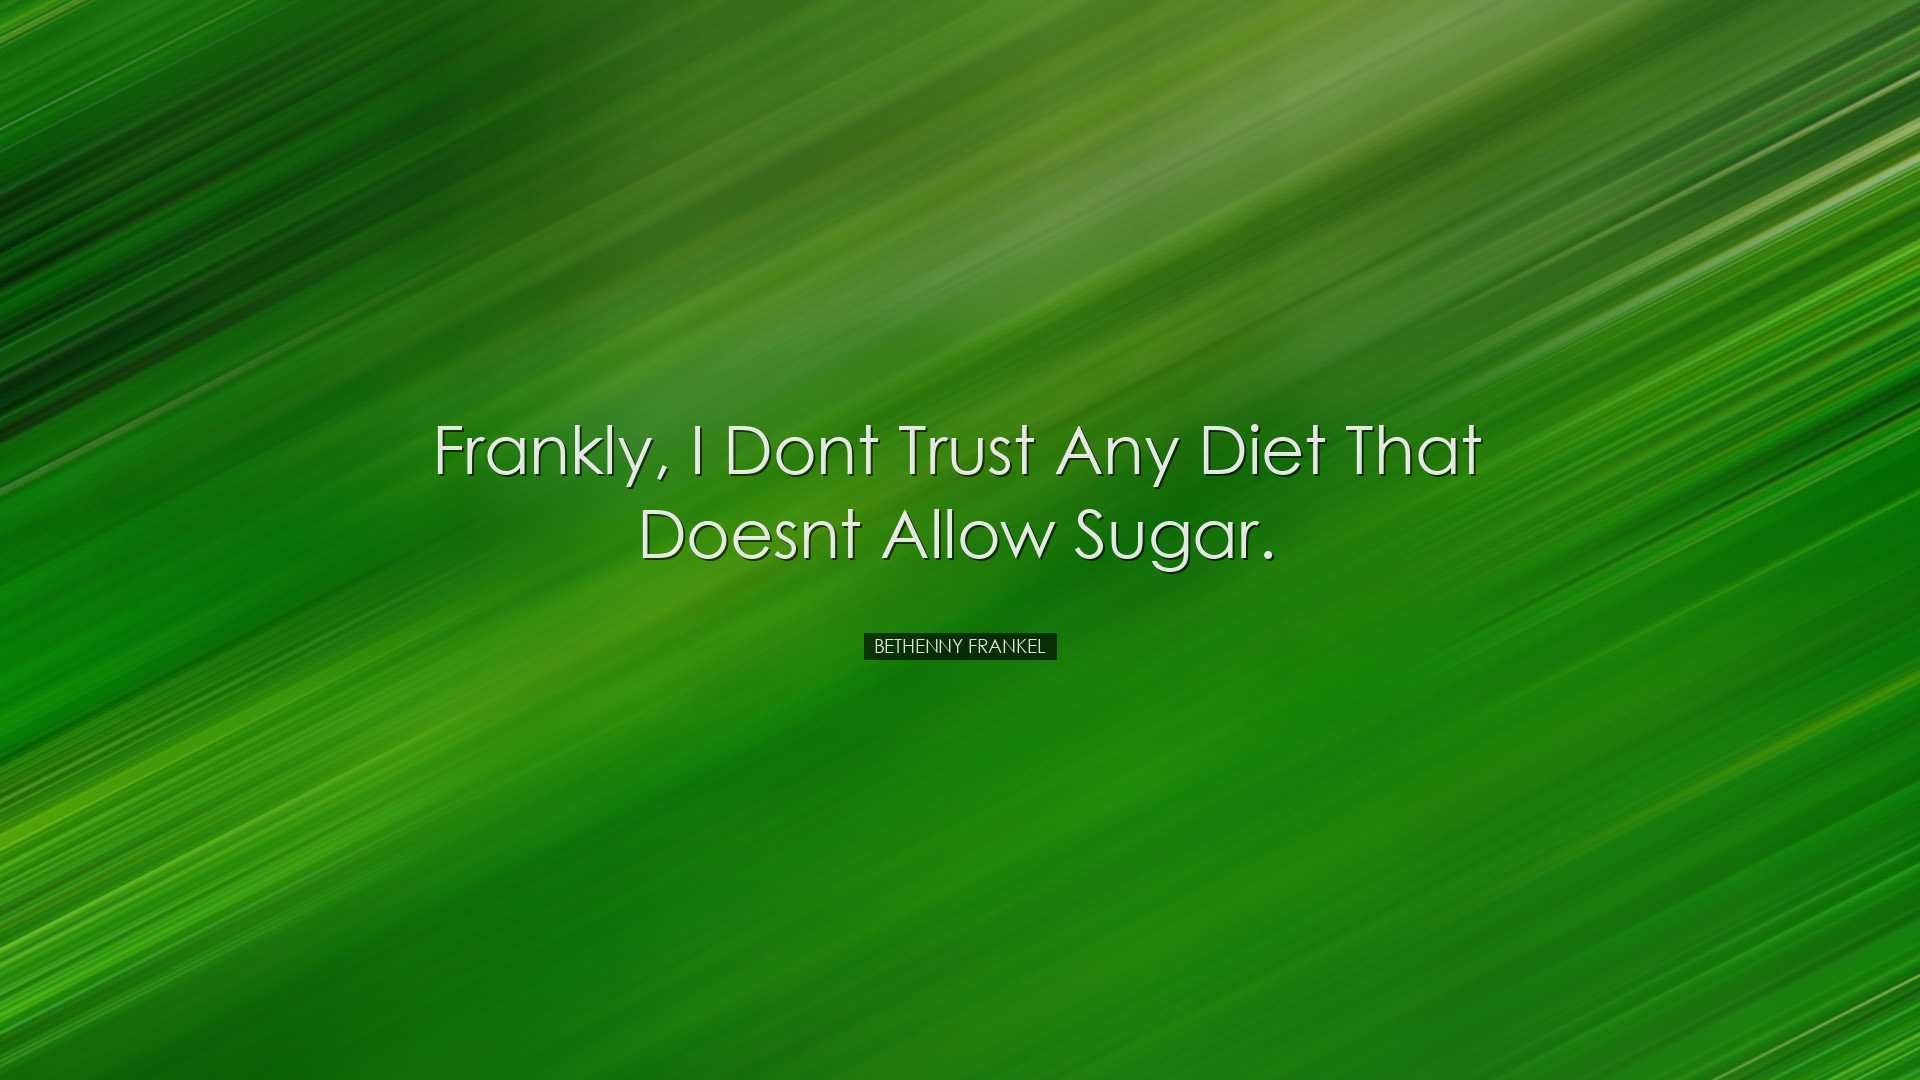 Frankly, I dont trust any diet that doesnt allow sugar. - Bethenny